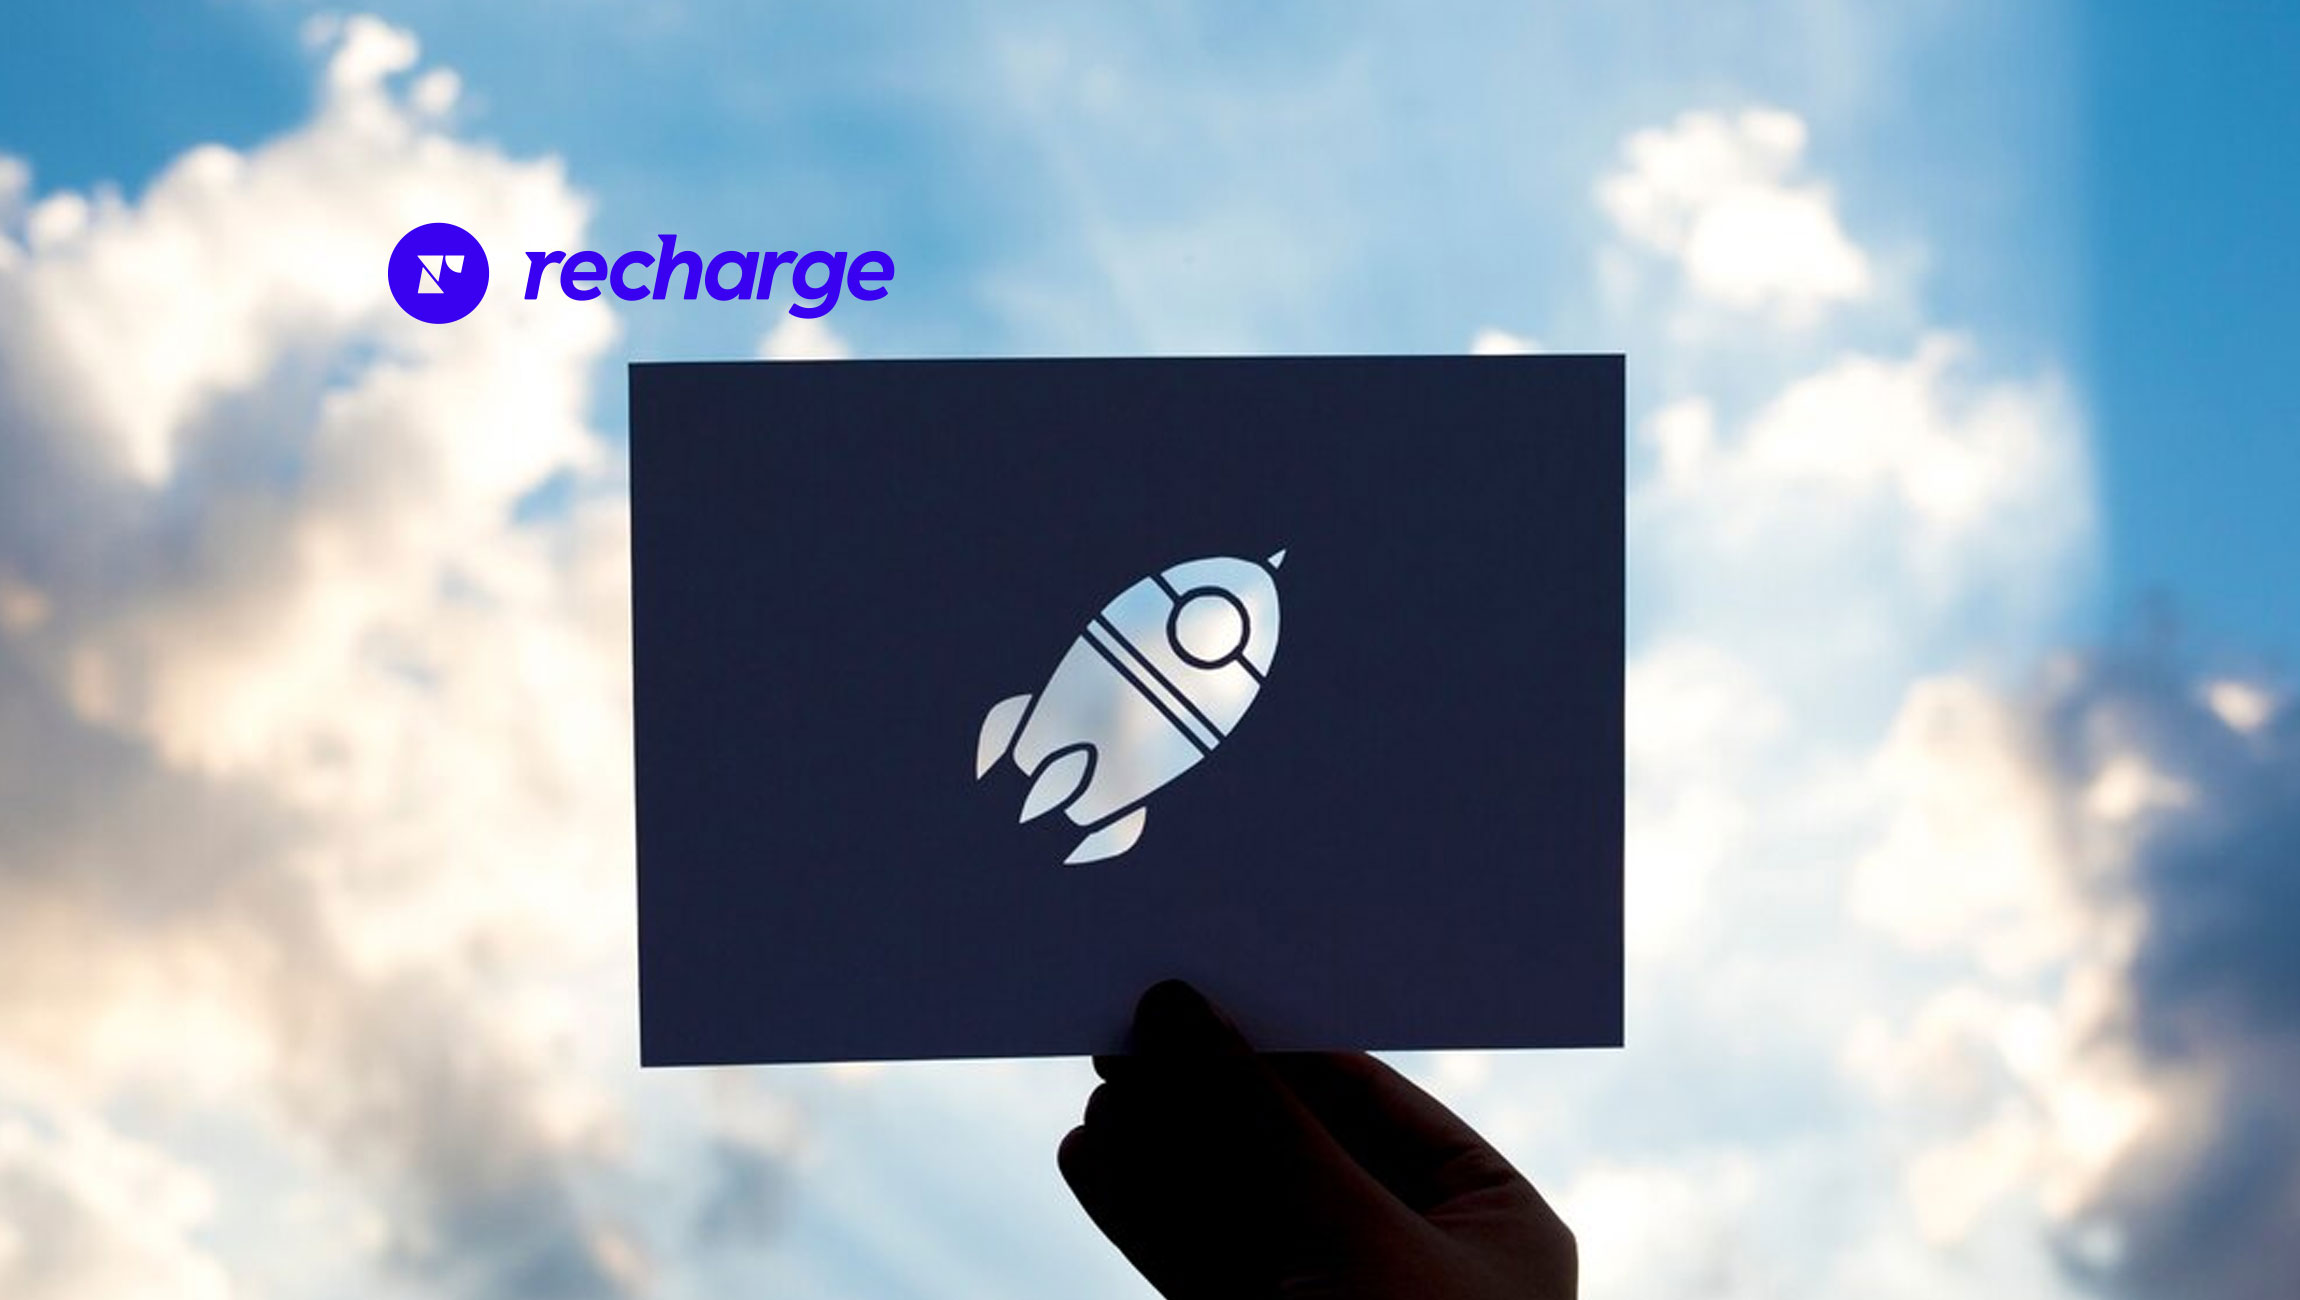 Recharge launches Retain, a suite of tools to support retention throughout subscriber journeys